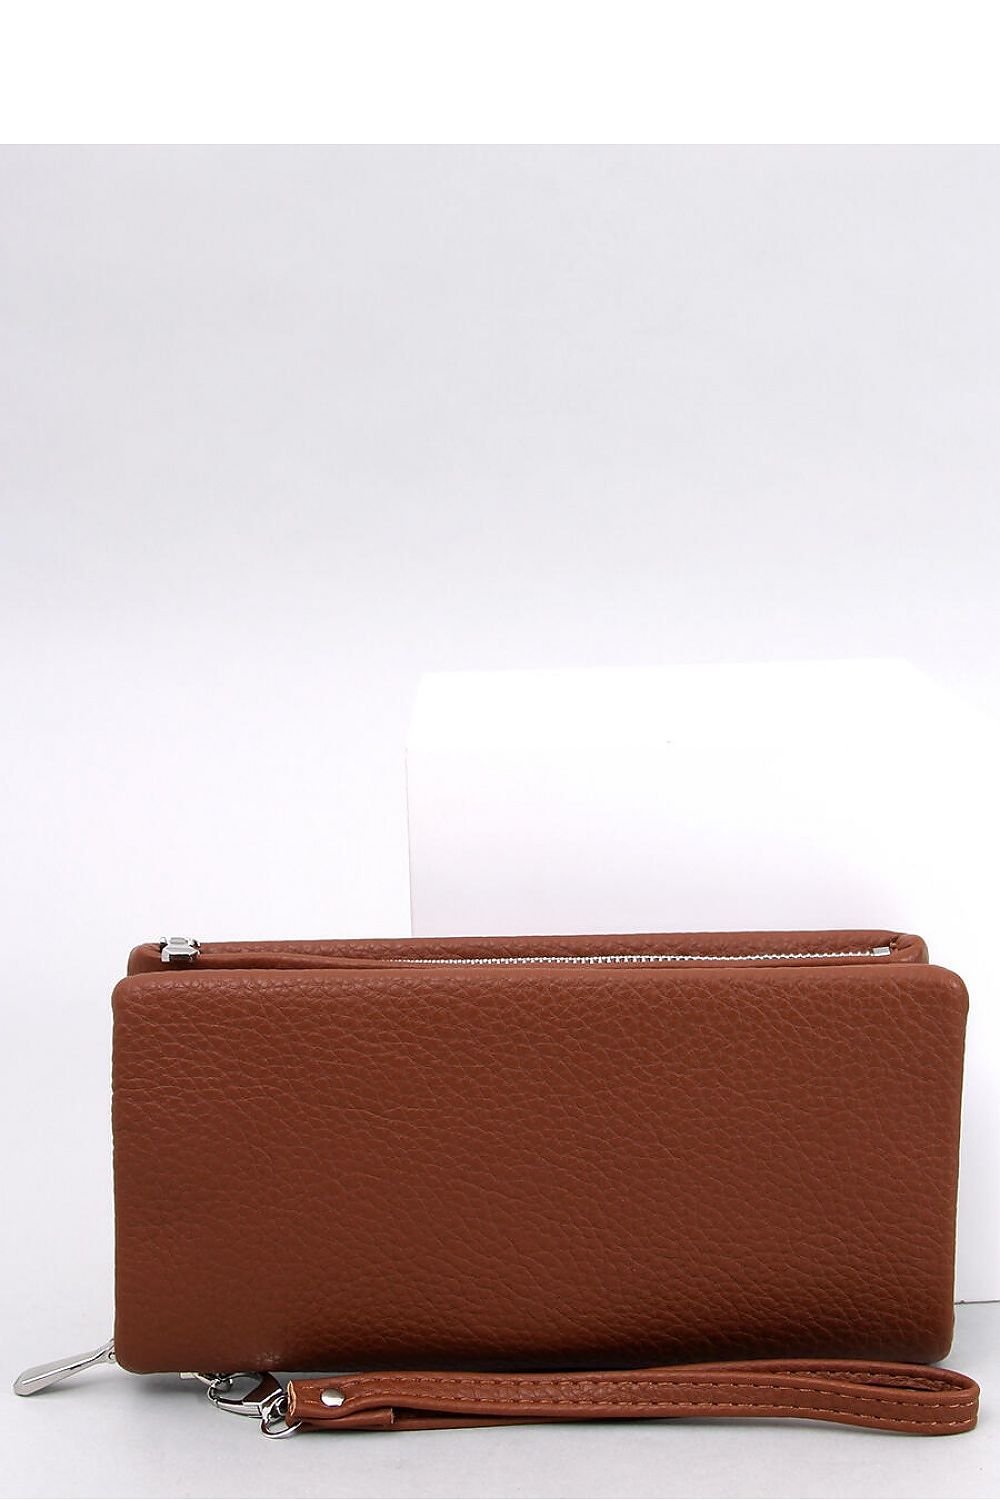 Women`s wallet - M&H FashionWomen`s walletM&H FashionM&H Fashion189664_1103922one-size-fits-allwallet InelloM&H FashionM&H FashionWomen's wallet with an additional strap. It is zippered and has numerous compartments, card tabs, a pocket for small coins. It is extremely practical - see for yoursWomen`s wallet